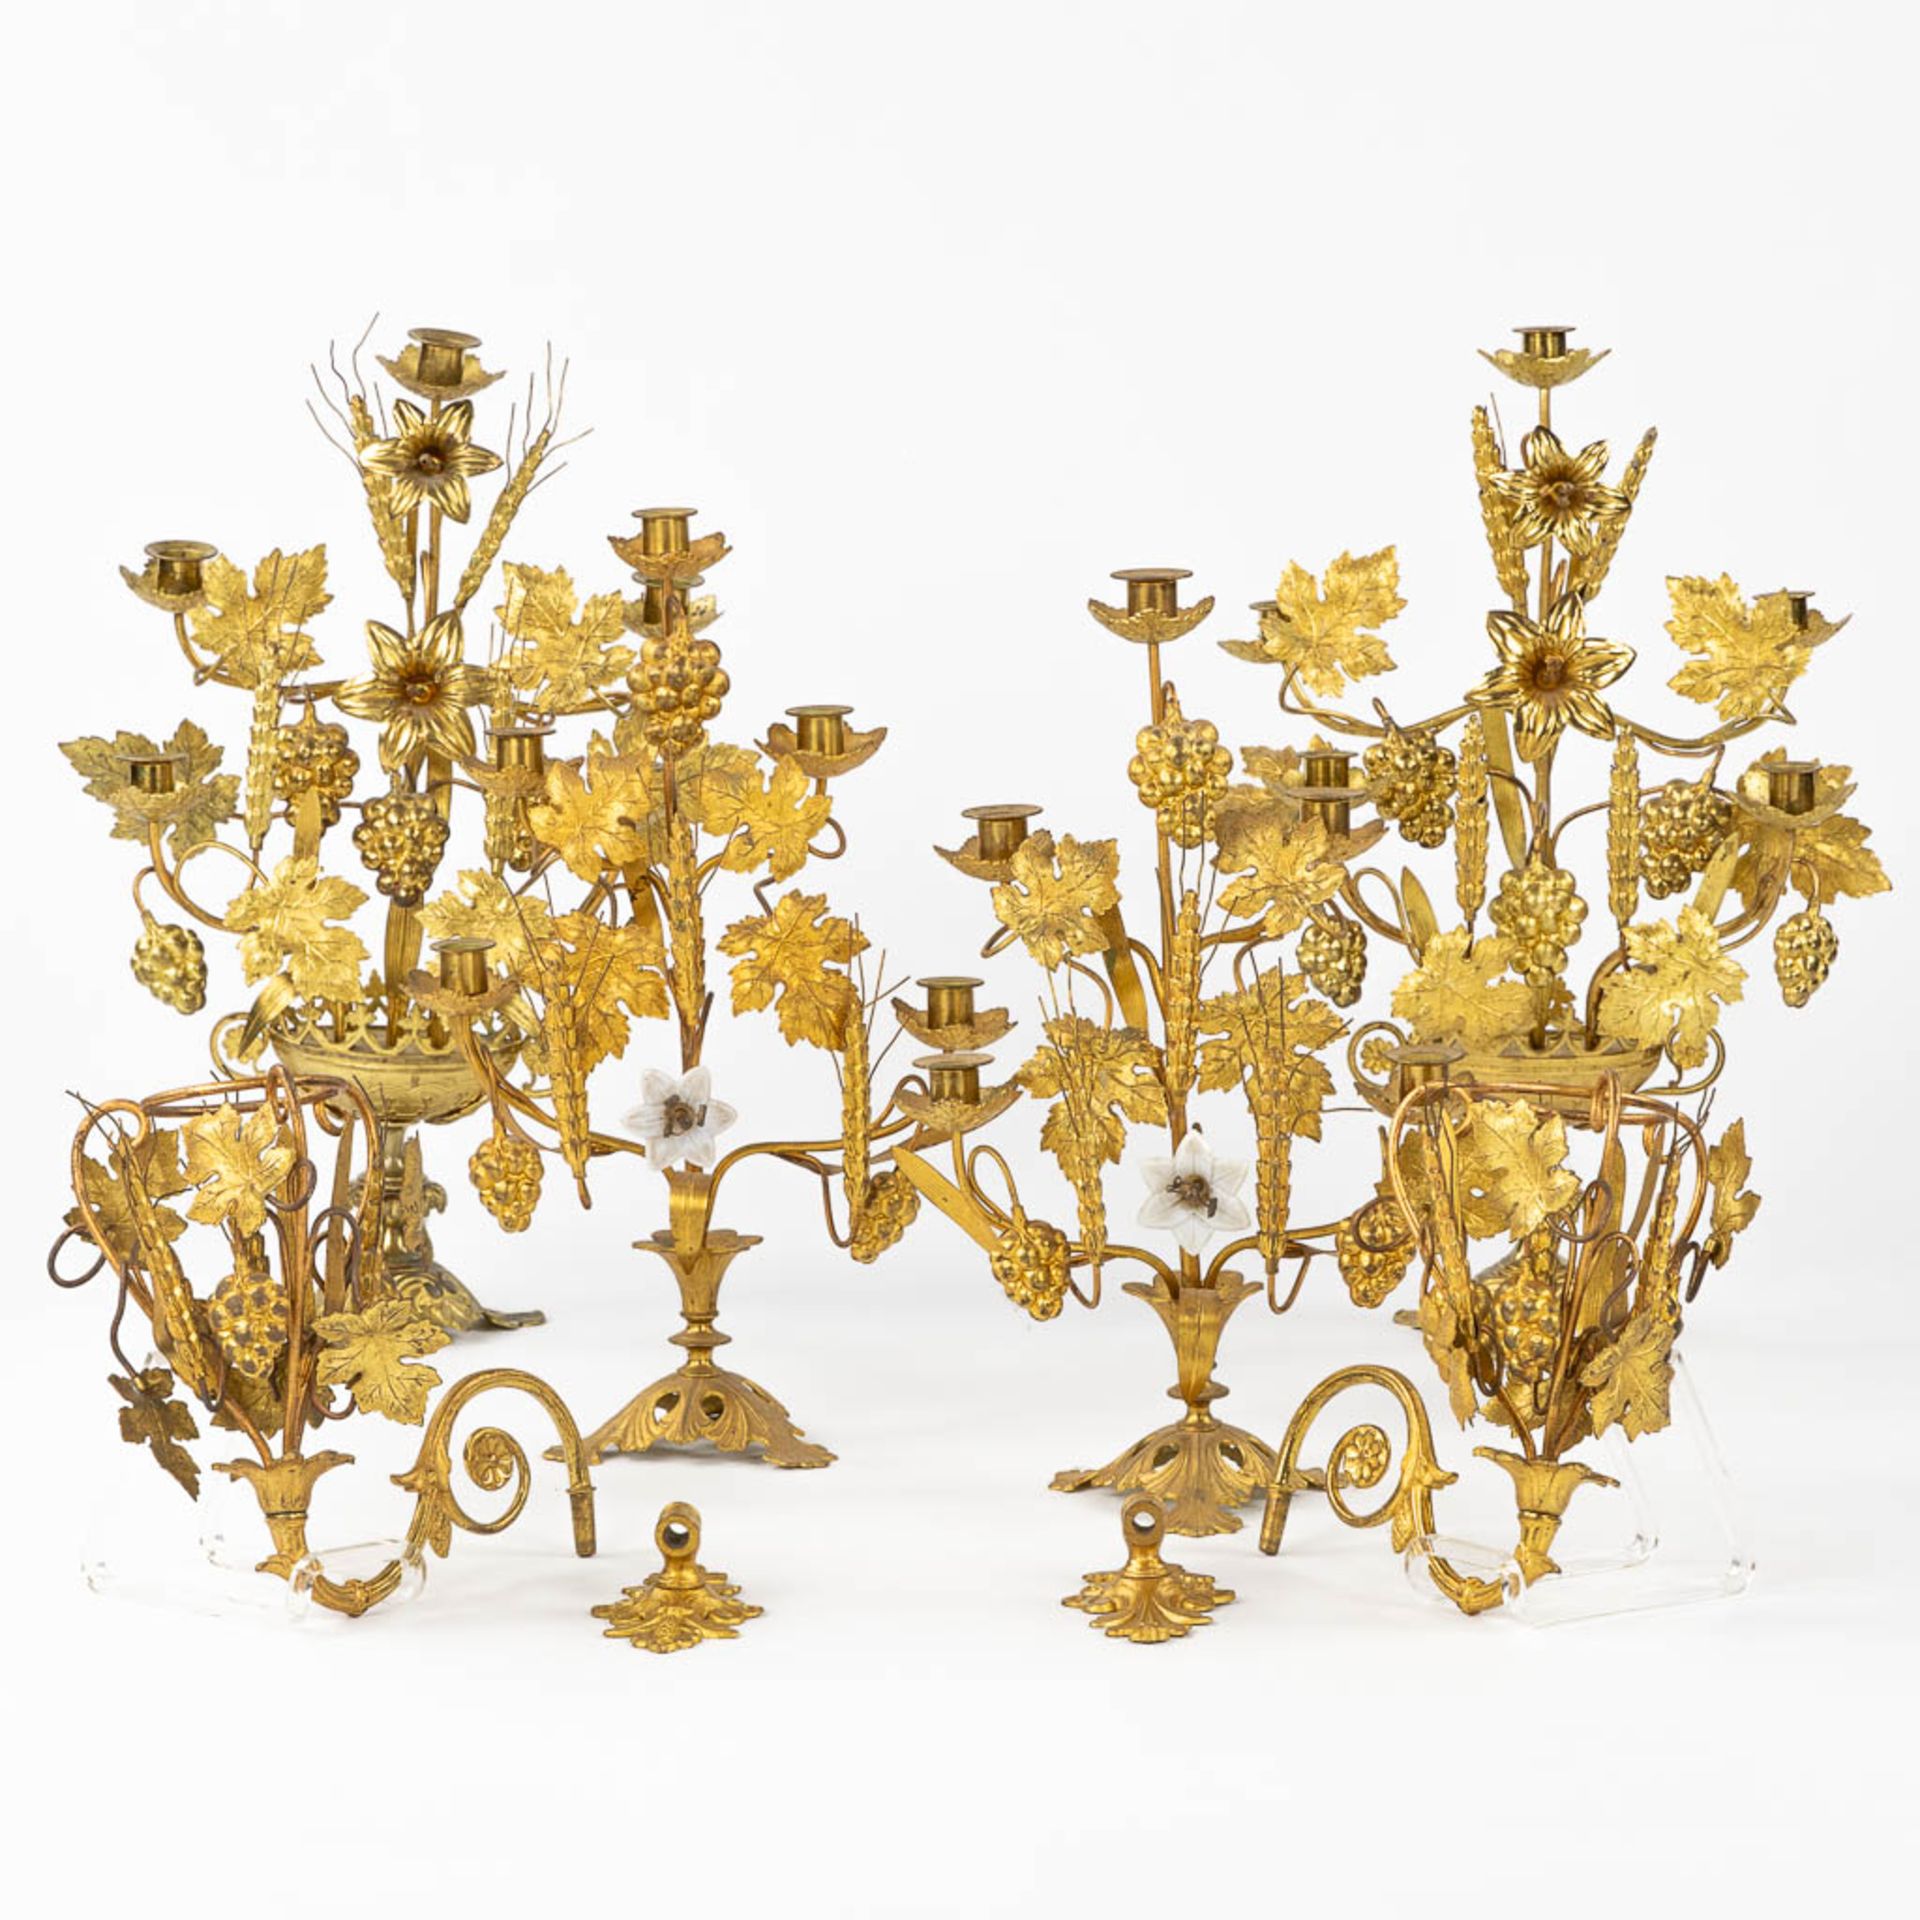 Two pairs of Church Candelabra and a pair of wall-mounted candelabra, Gilt metal decorated with whea